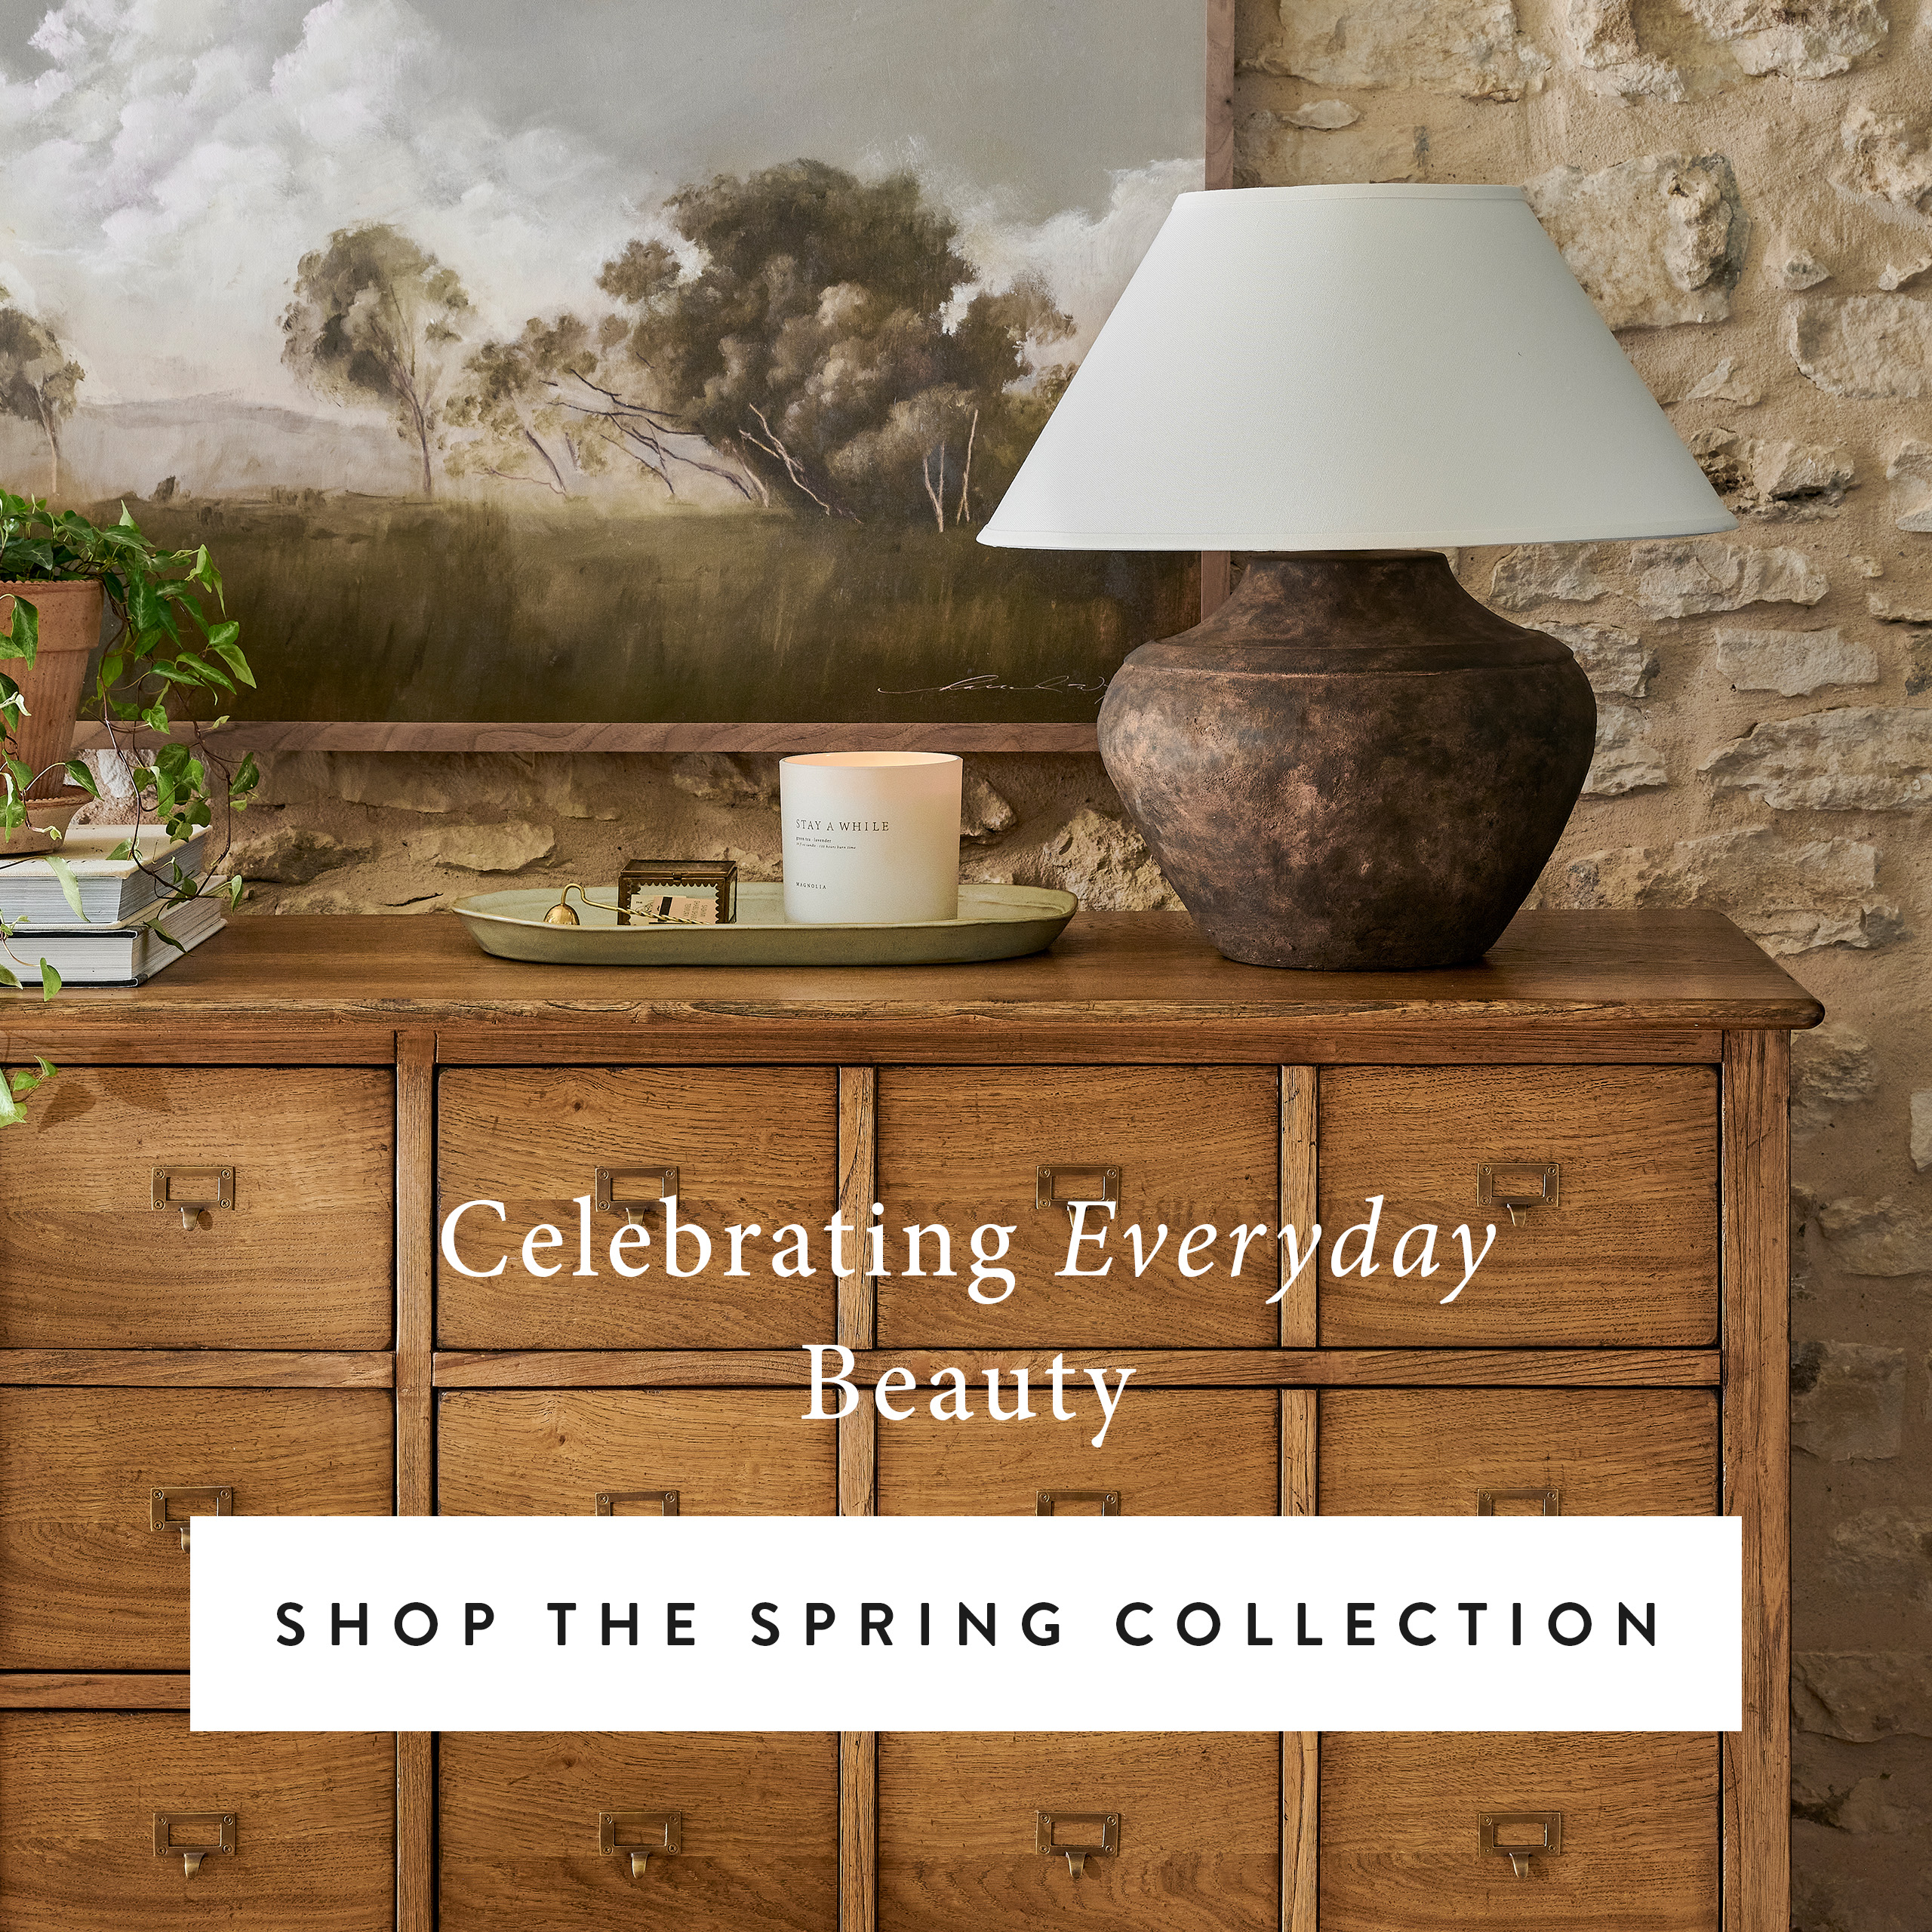 Celebrating Everyday Beauty - click to shop the spring collection